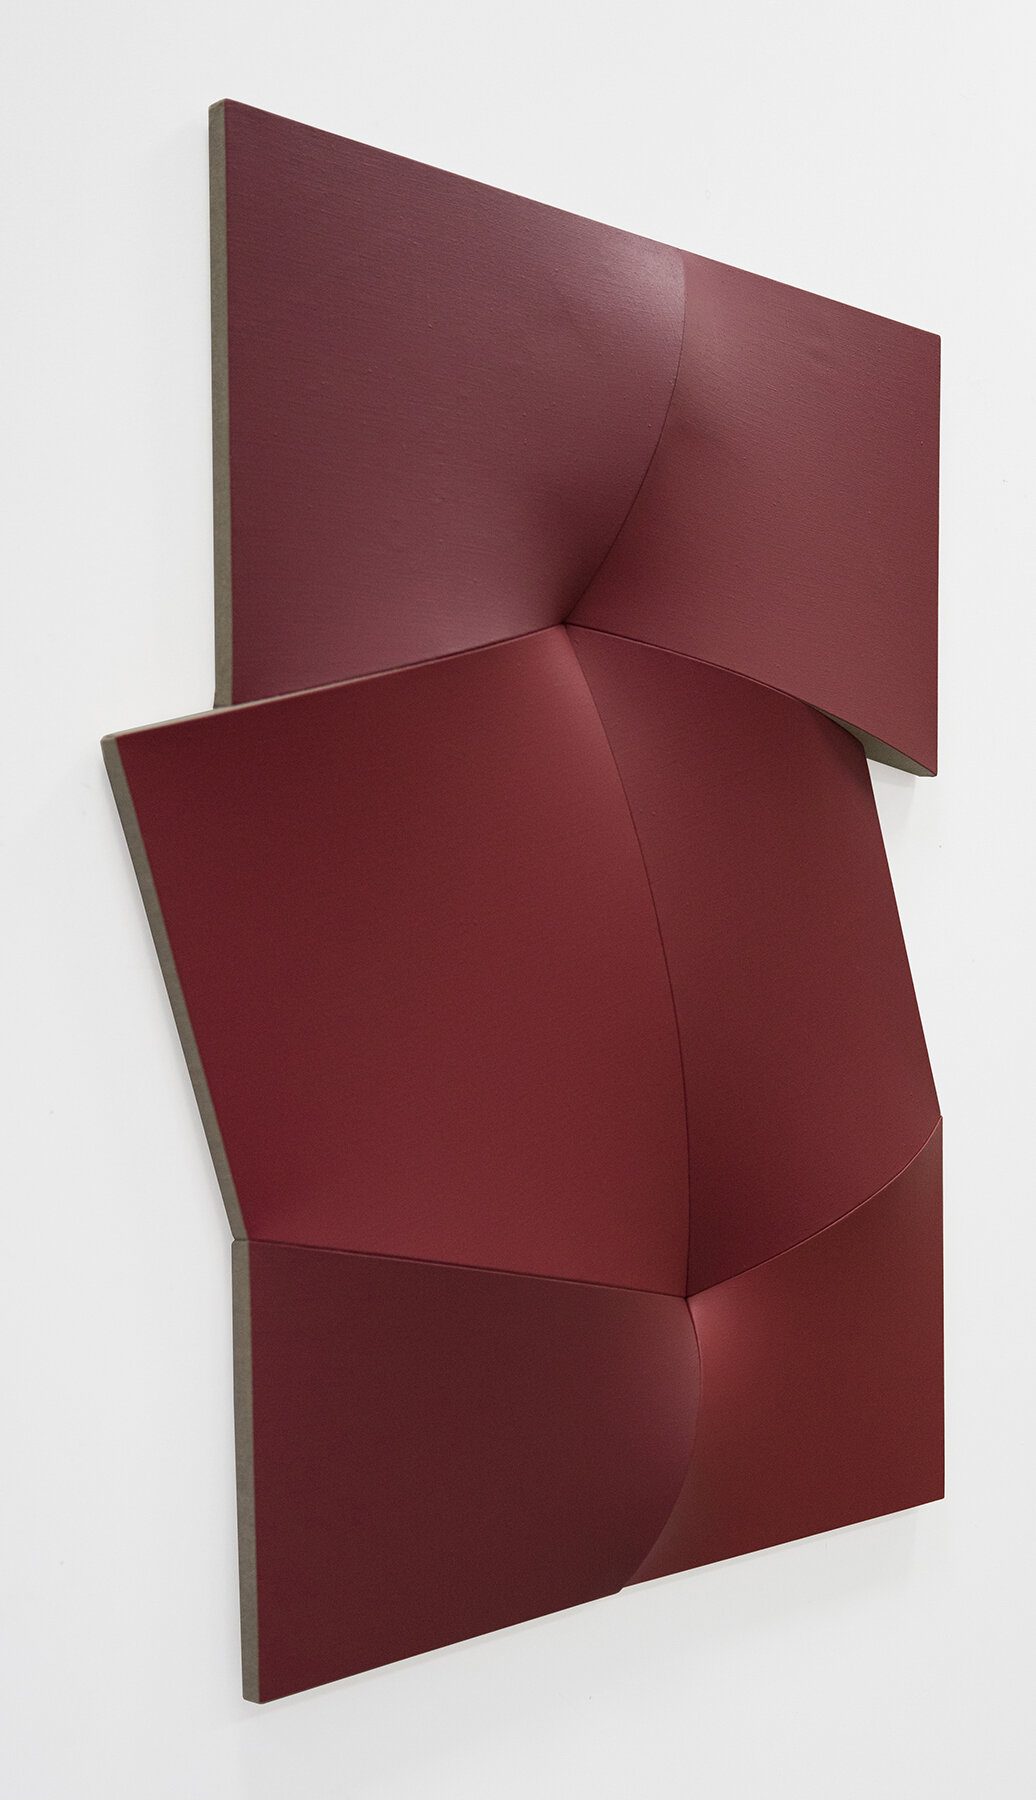 JAN MAARTEN VOSKUIL | Filthy red dance (side view), 47.25 x 41.5 x 2.75 inches / 120 x 105 x 7 cm, acrylics on linen, 2019